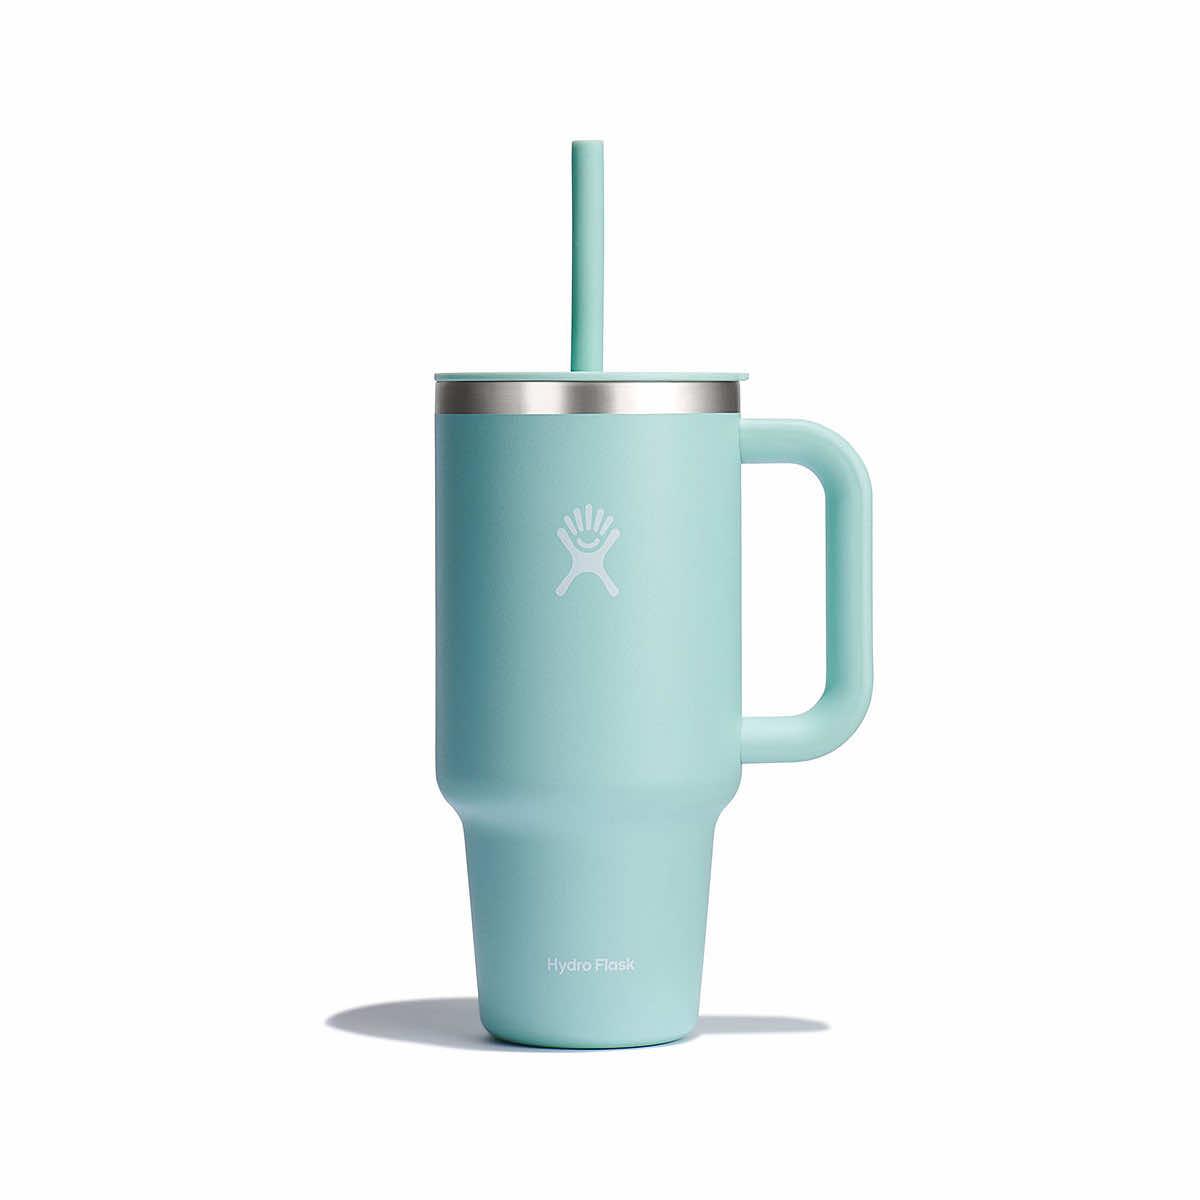 Hydroflask 16oz Coffee Mugs in Great Condition! - household items